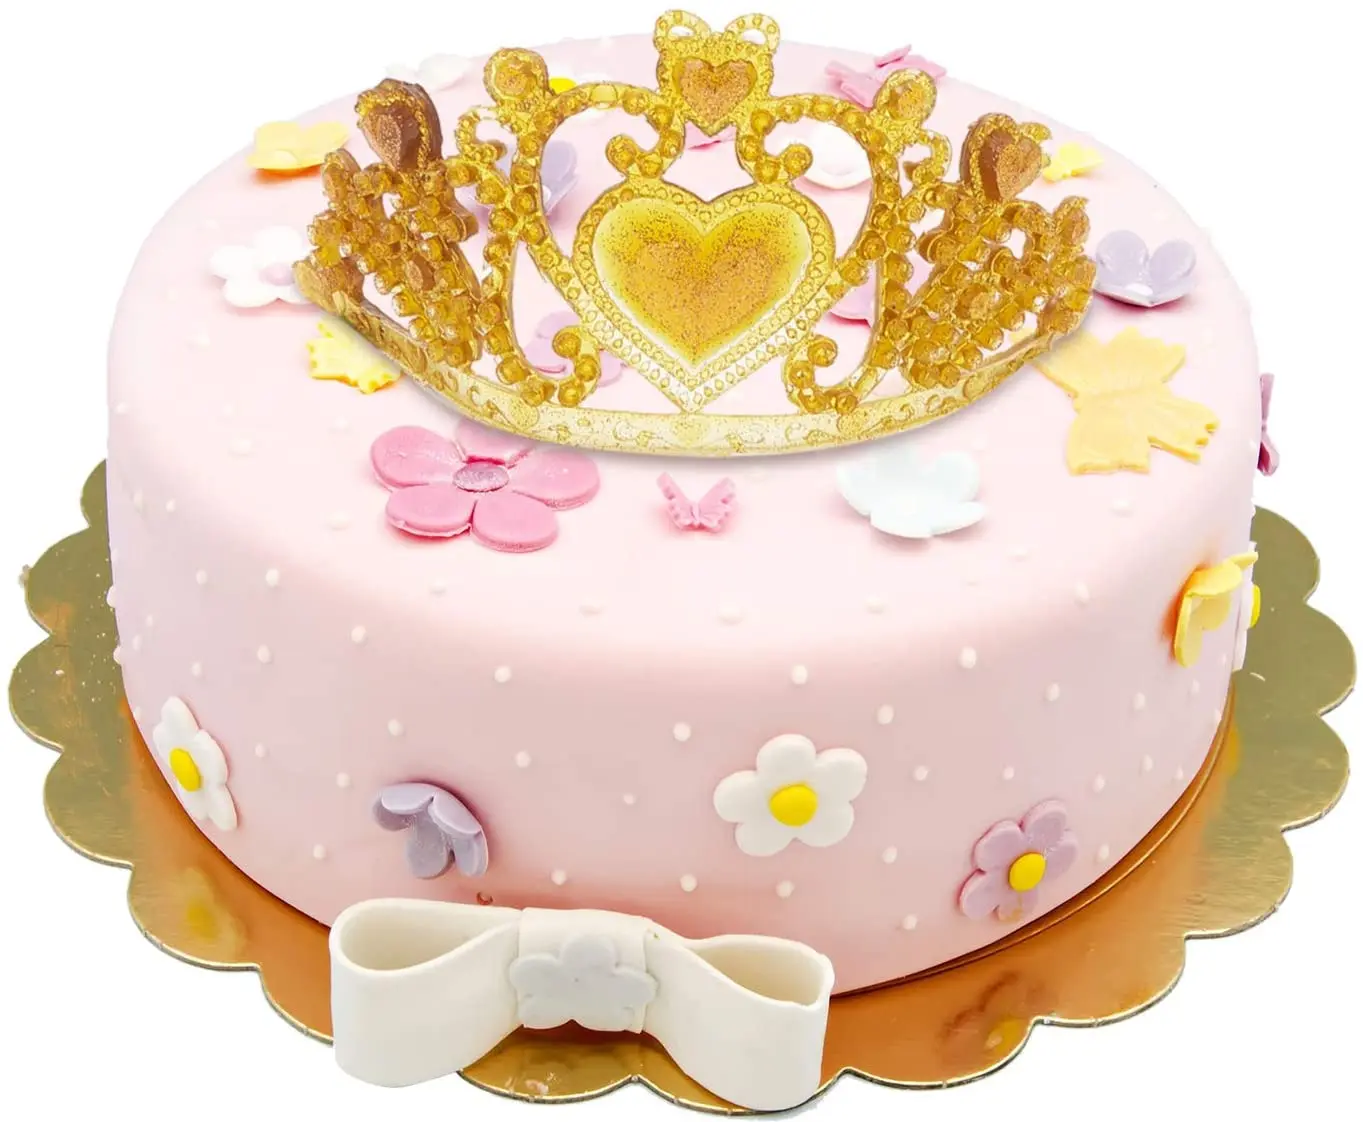 Details about   Fondant Cake Cookies Crown Chocolate Mold Silicone Mold Decorative Baking Tools 